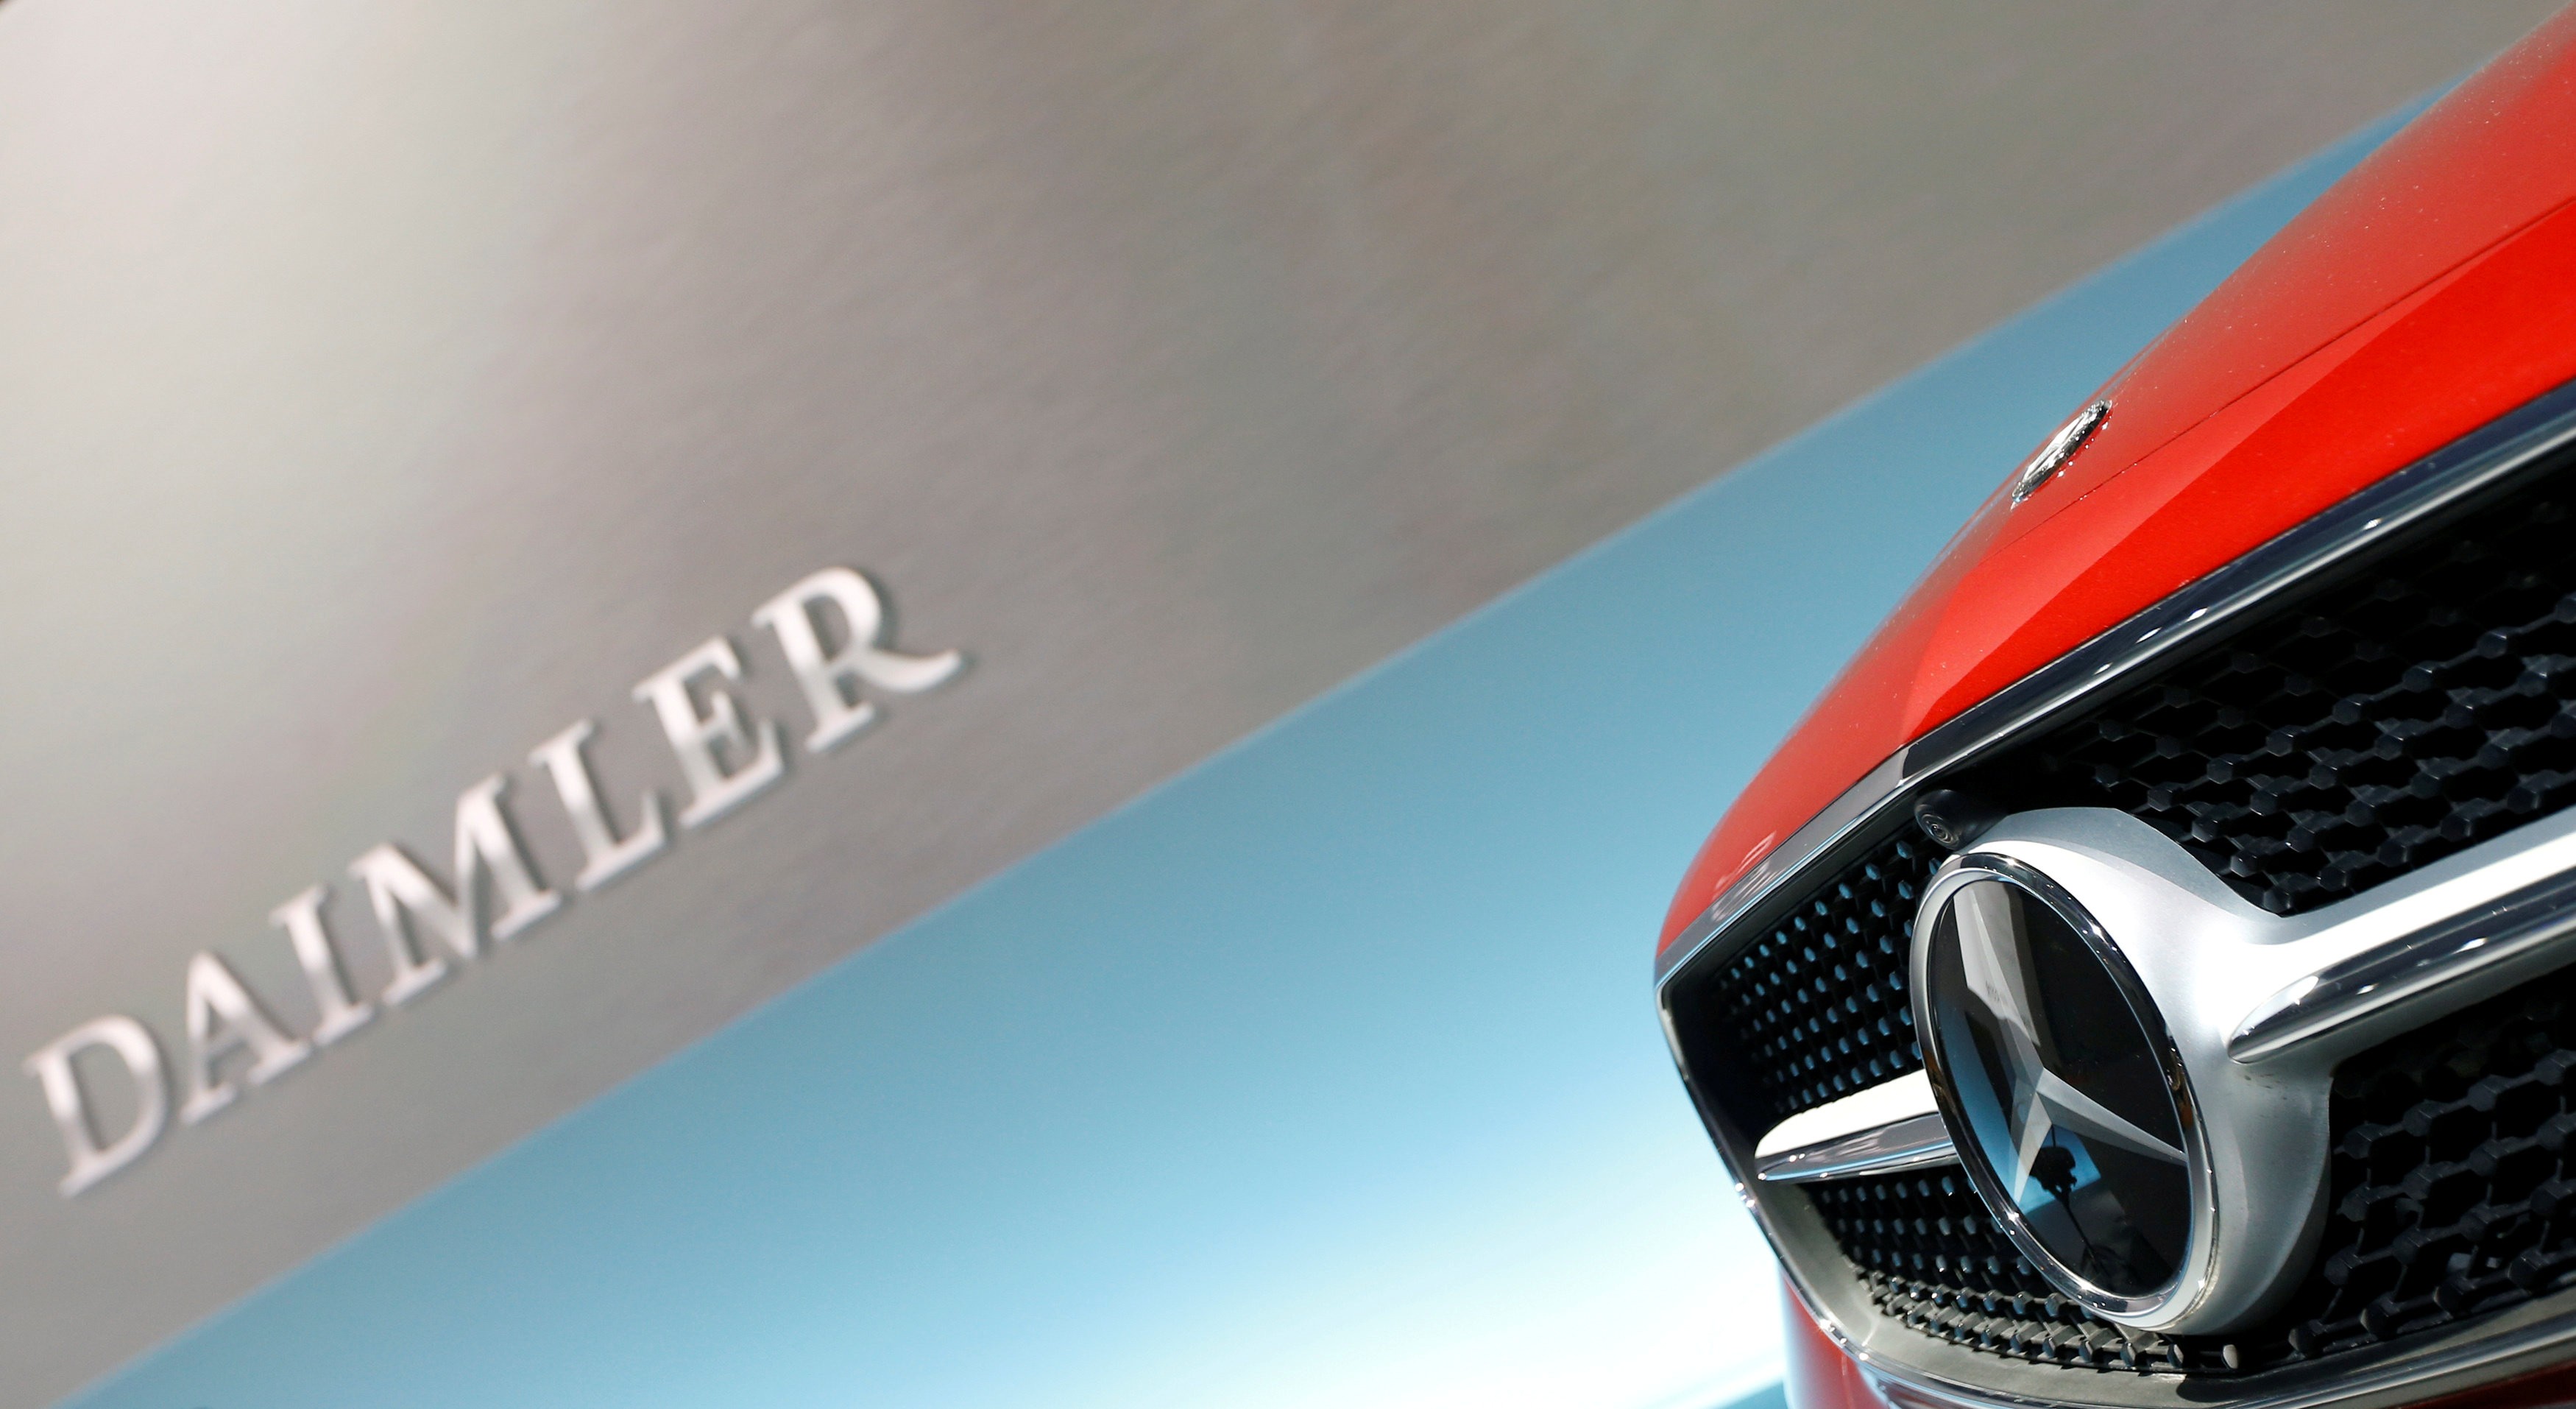 The Chinese carmaker Geely has spent US$3 billion to buy a 3 per cent stake in Mercedes-Benz parent Daimler. Photo: Reuters